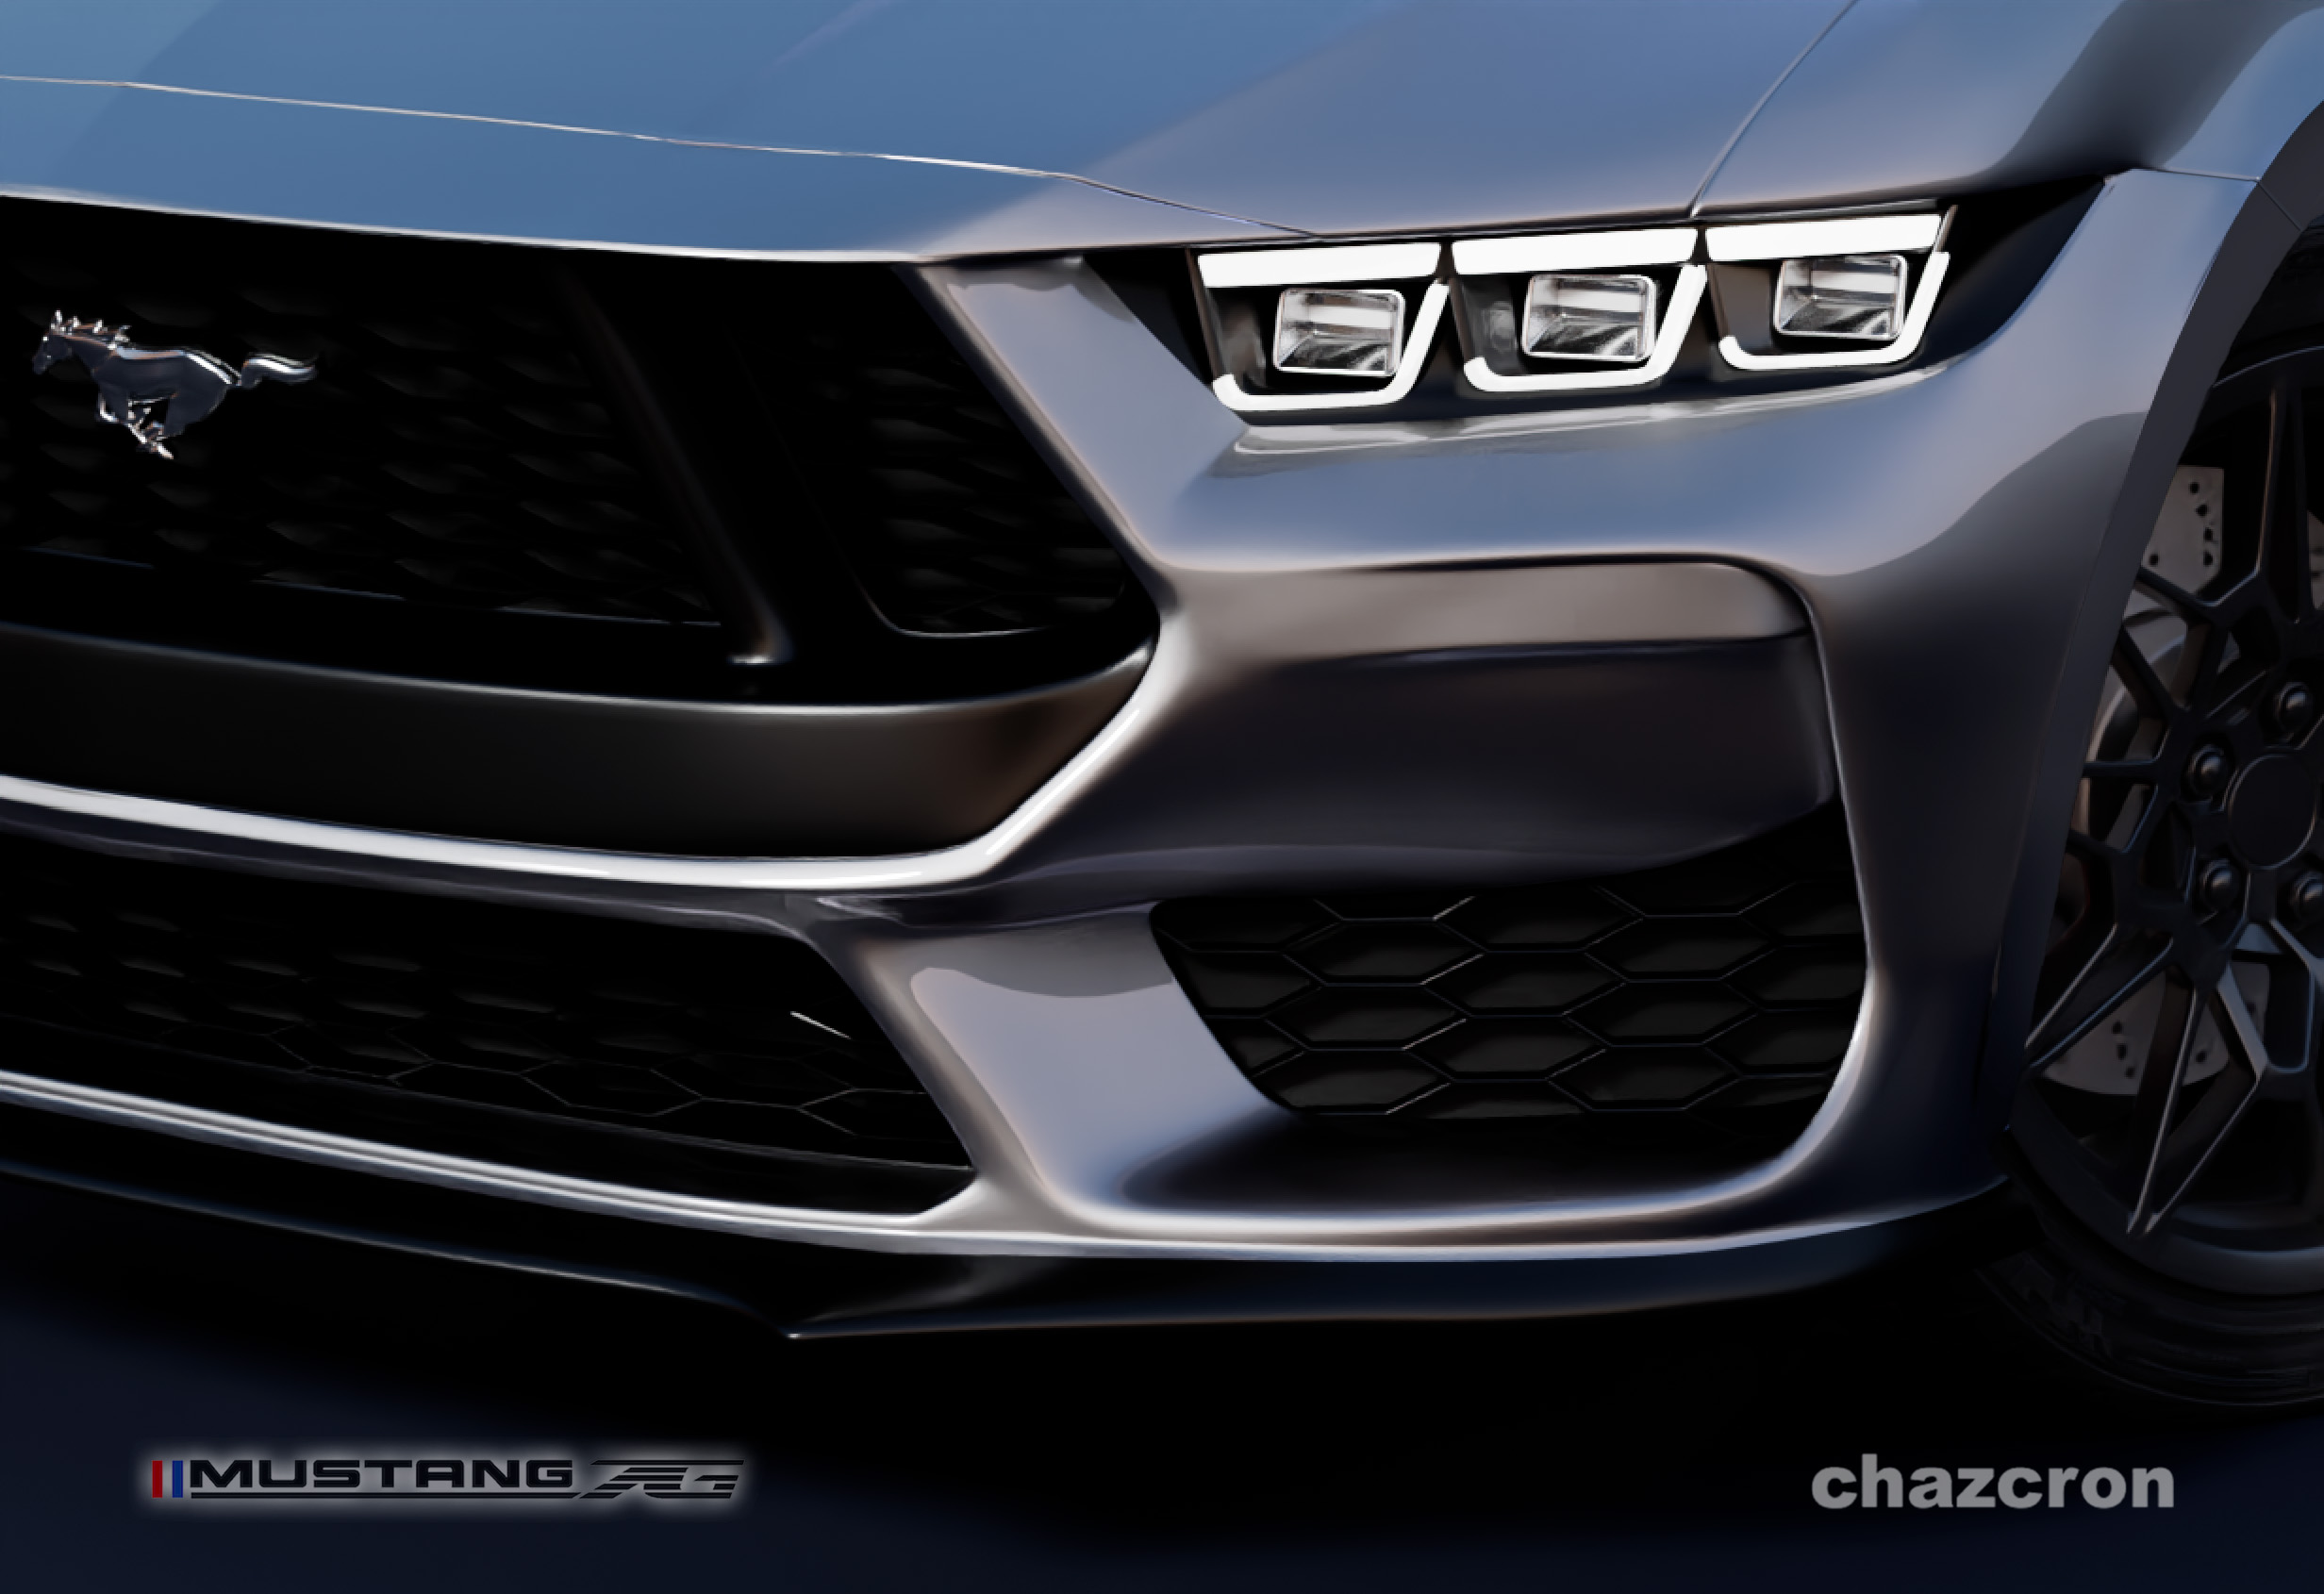 S650 Mustang chazcron weighs in... 7th gen 2023 Mustang S650 3D model & renderings in several colors! SilverTongue